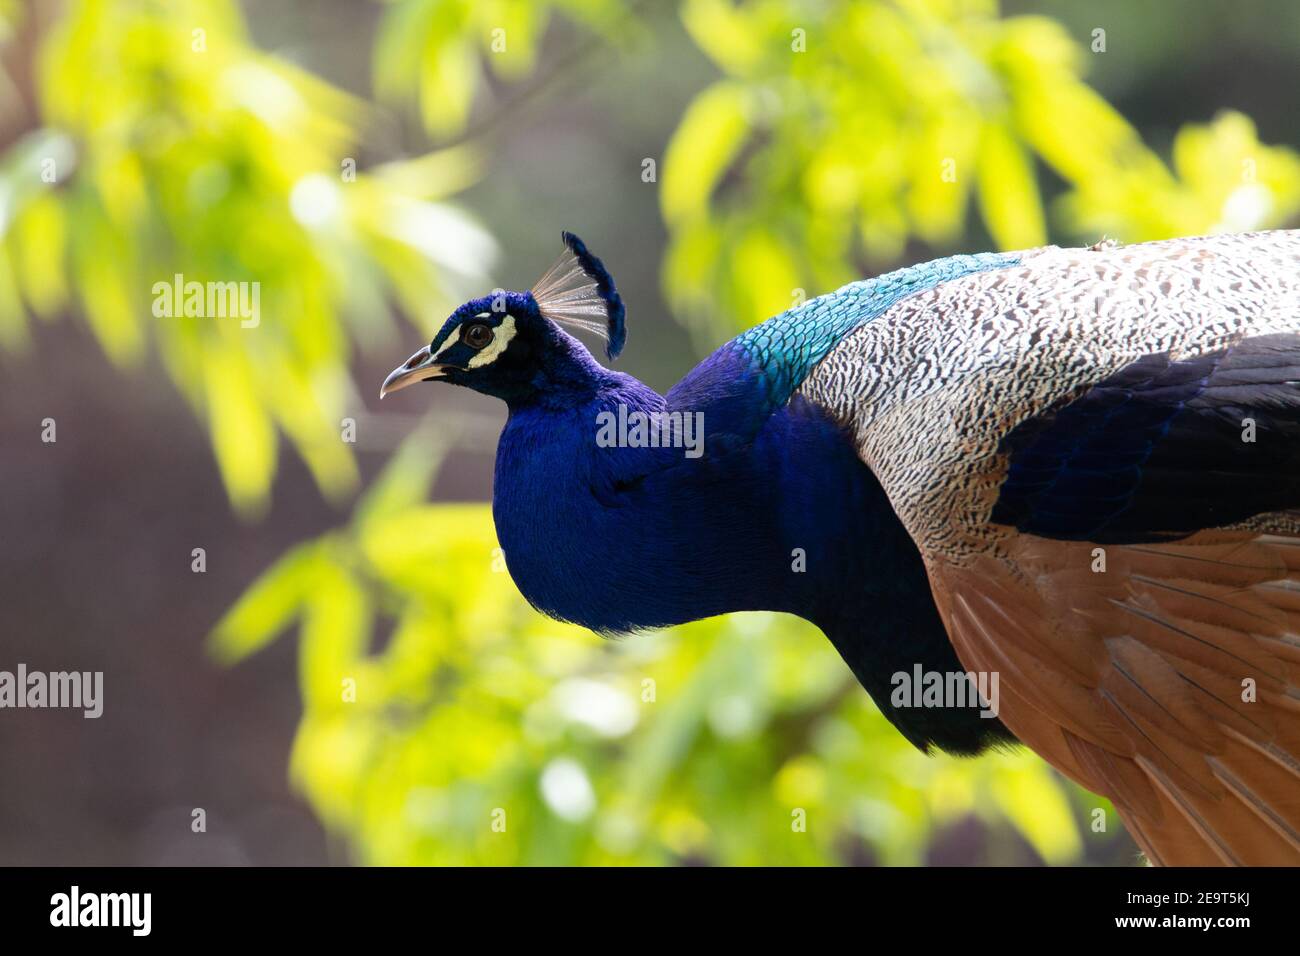 Blue peafowl (Pavo cristatus) head and shoulders of blue peafowl with pale yellow leaves in the background Stock Photo